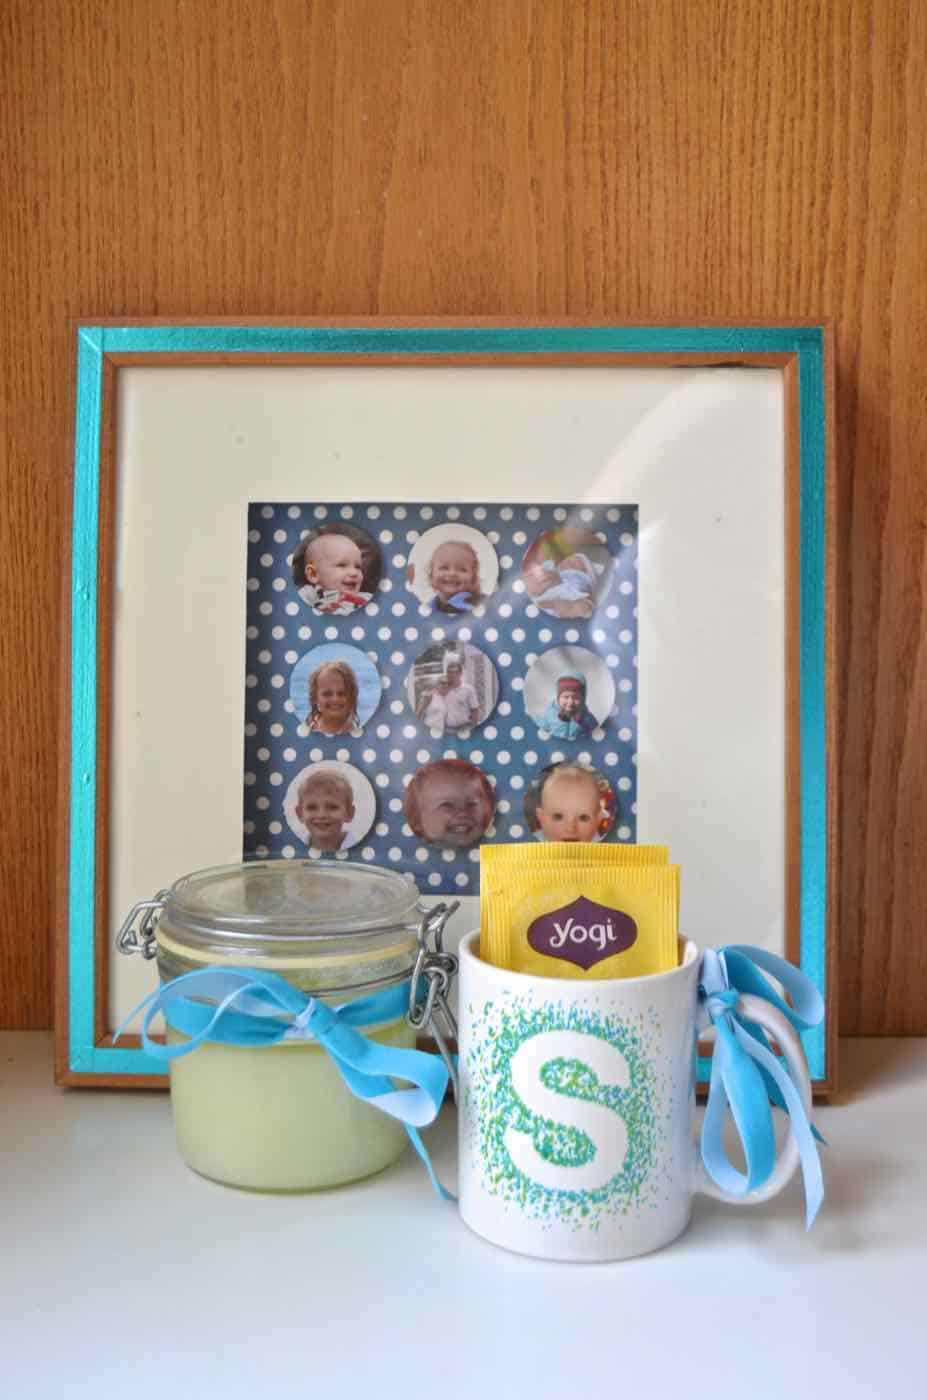 Easy DIY last minute spa gifts... perfect for Mother's Day.